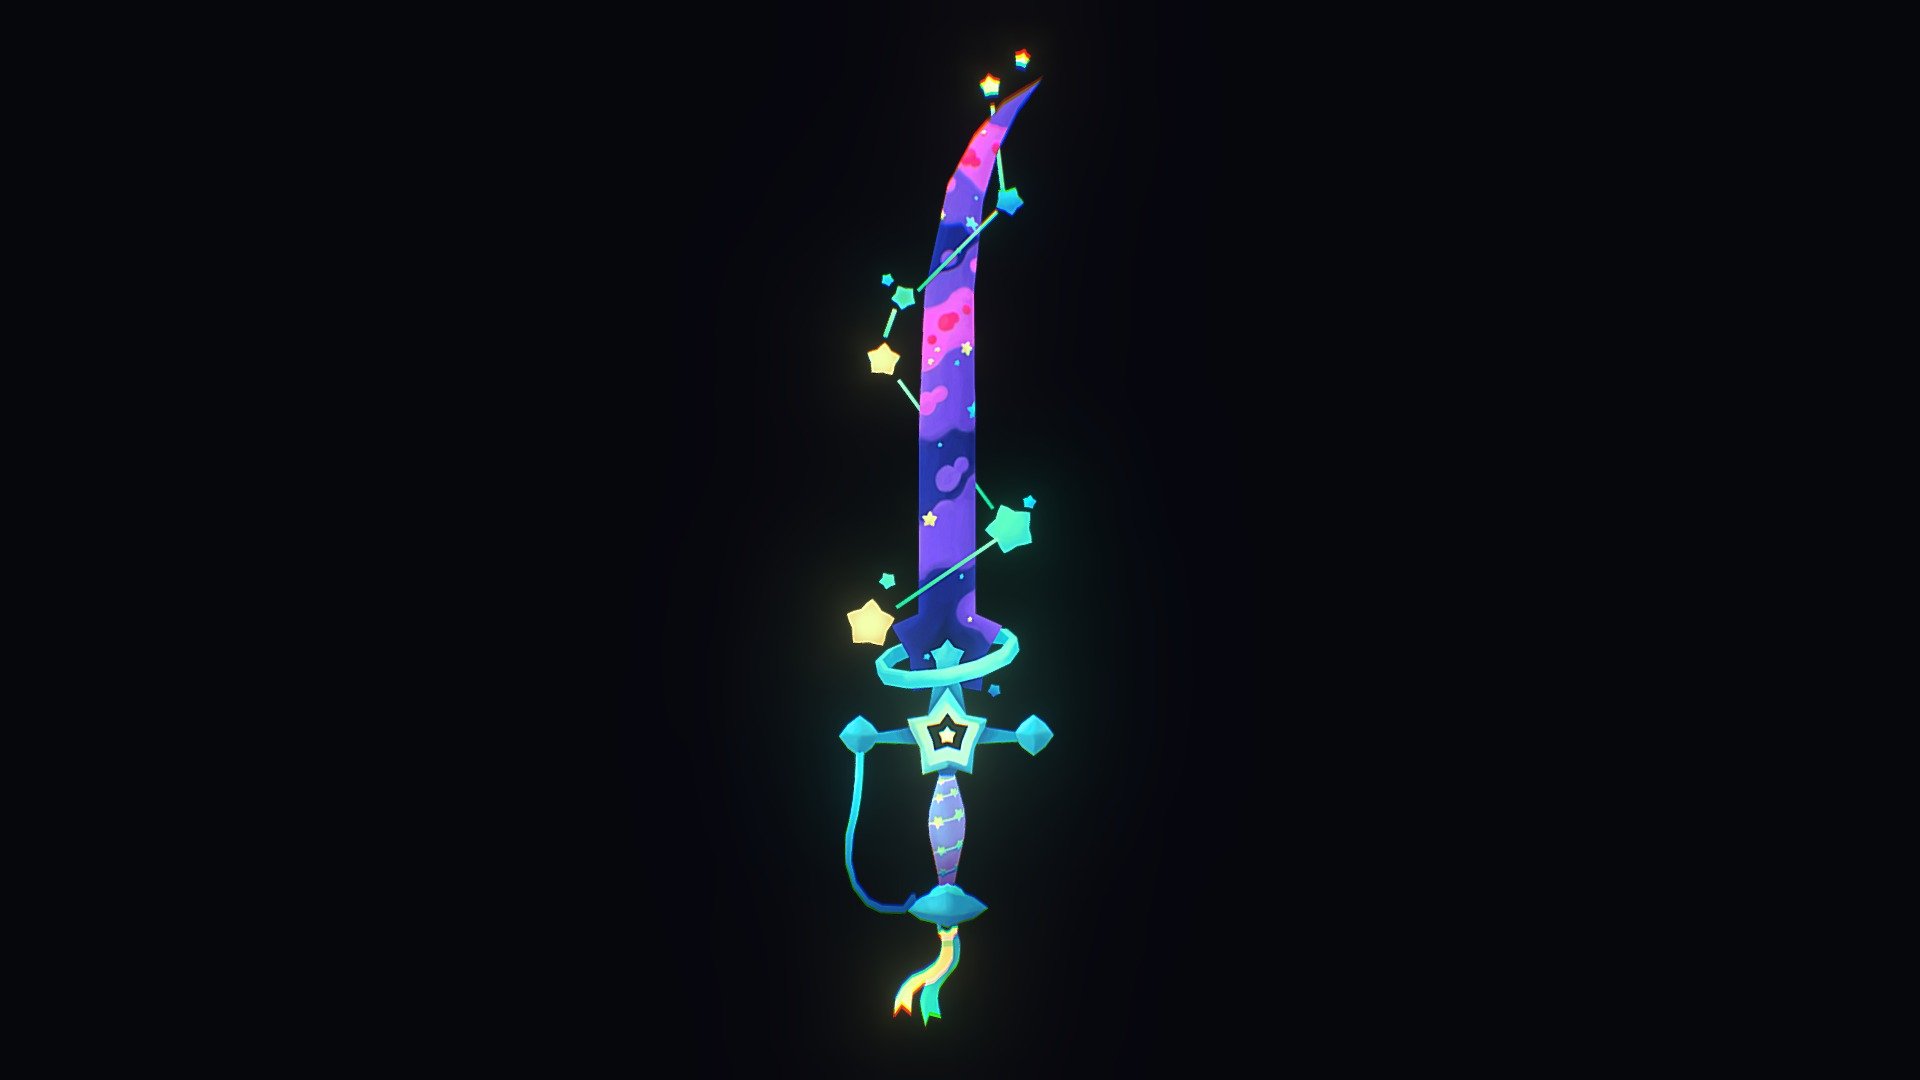 Made this glorious galaxy sword from #swordtember ⚔️✨
Concept by the Ultra Stellar Mark Usmiani 🌟https://twitter.com/MarkUsmianiArt/status/1303039258278735874?s=20
 - Star Sword 🌟 - 3D model by CourtneyFayM (@CourtneyFairytaleArt) 3d model